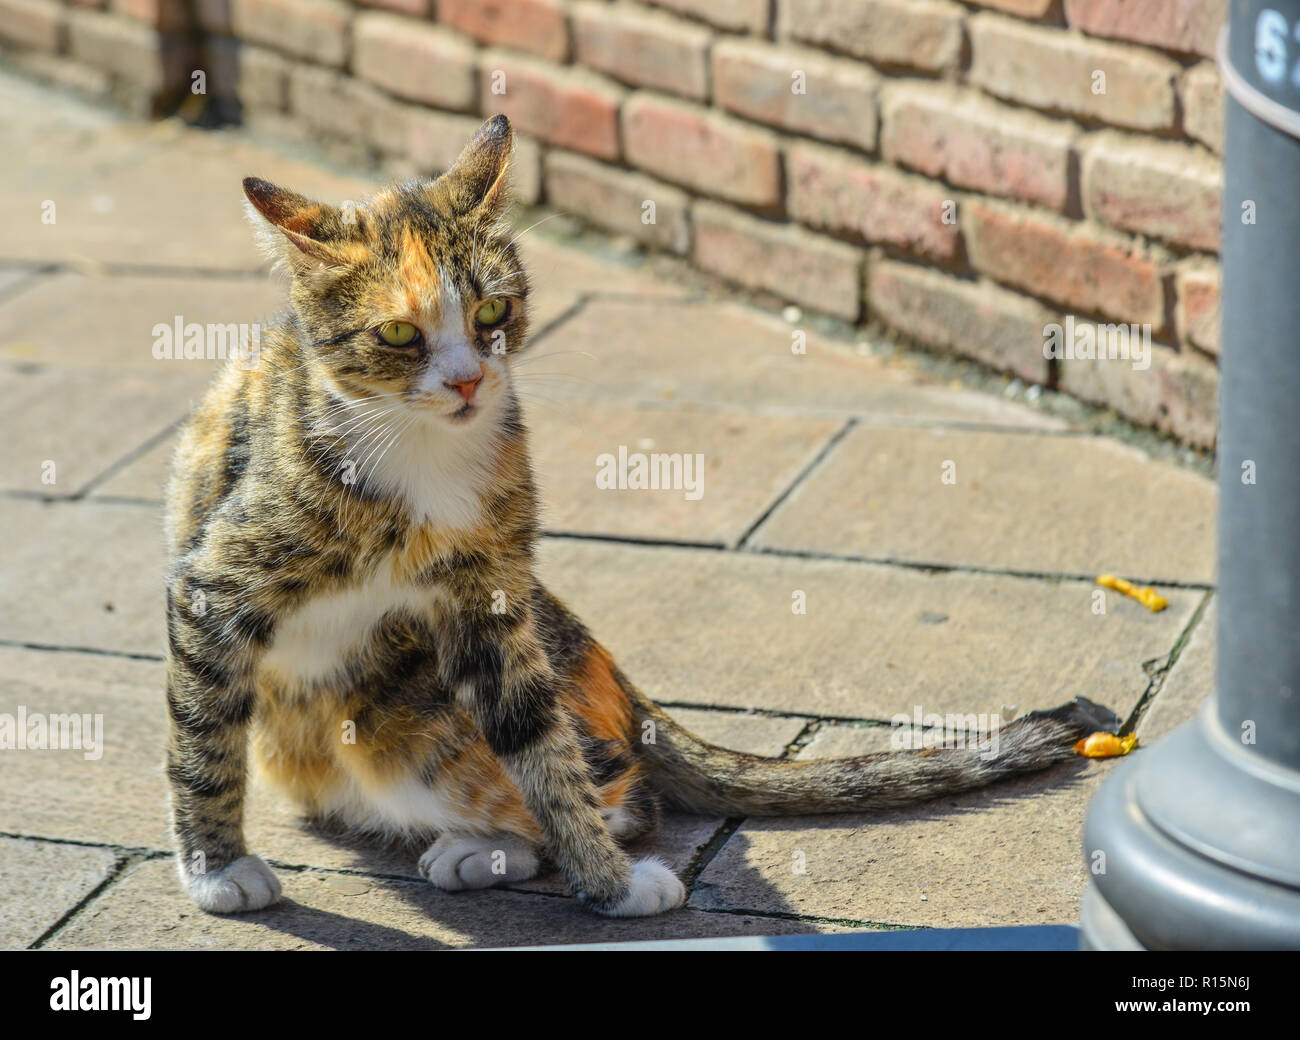 A pretty cat relaxing on road in Tbilisi, Georgia. Stock Photo